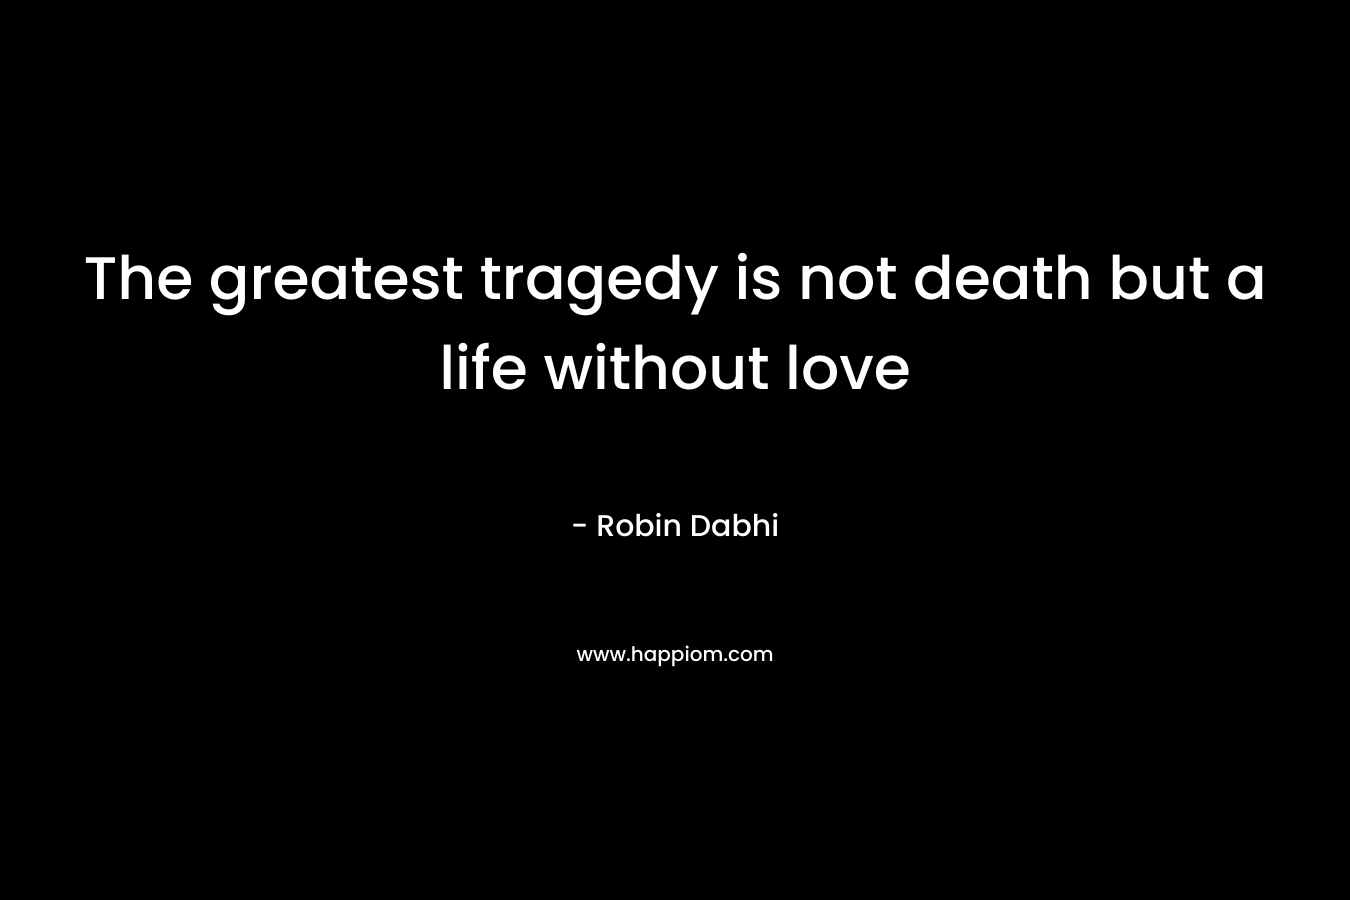 The greatest tragedy is not death but a life without love